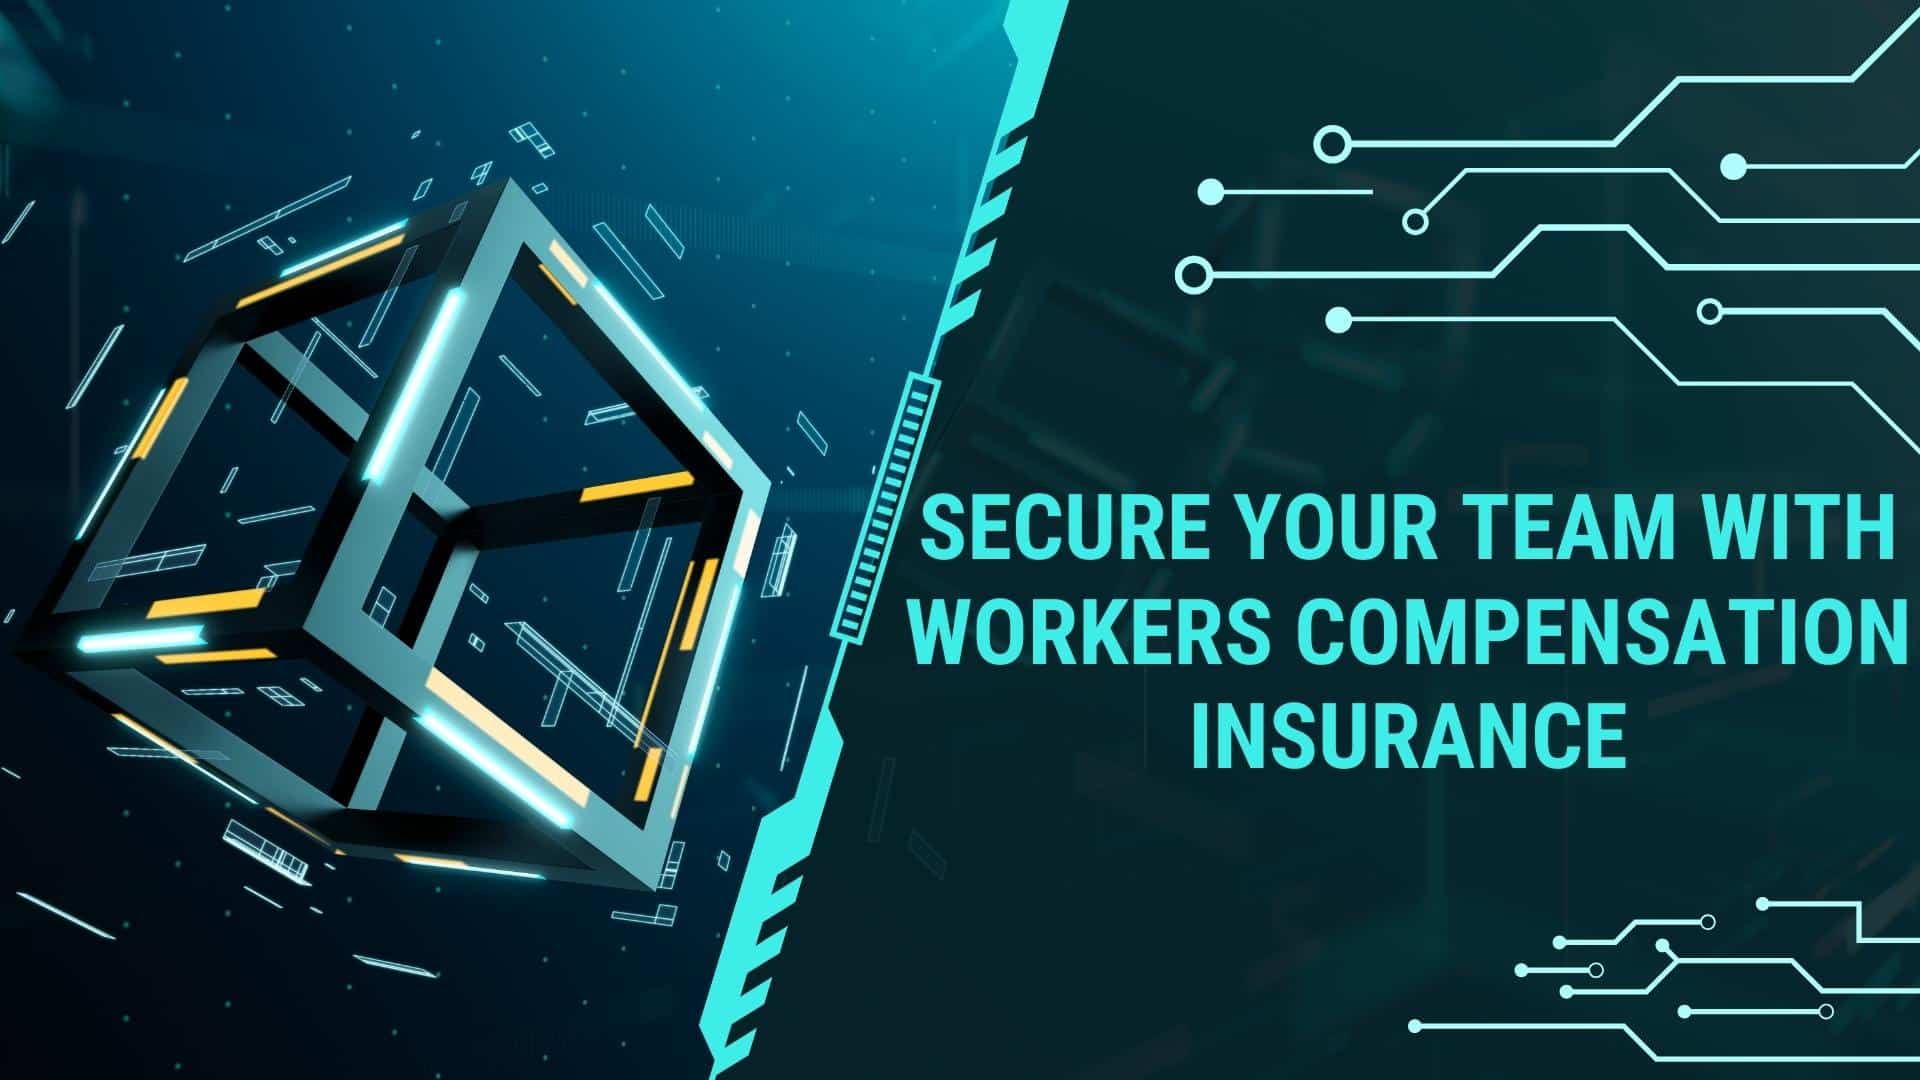 Secure Your Team with Workers Compensation Insurance